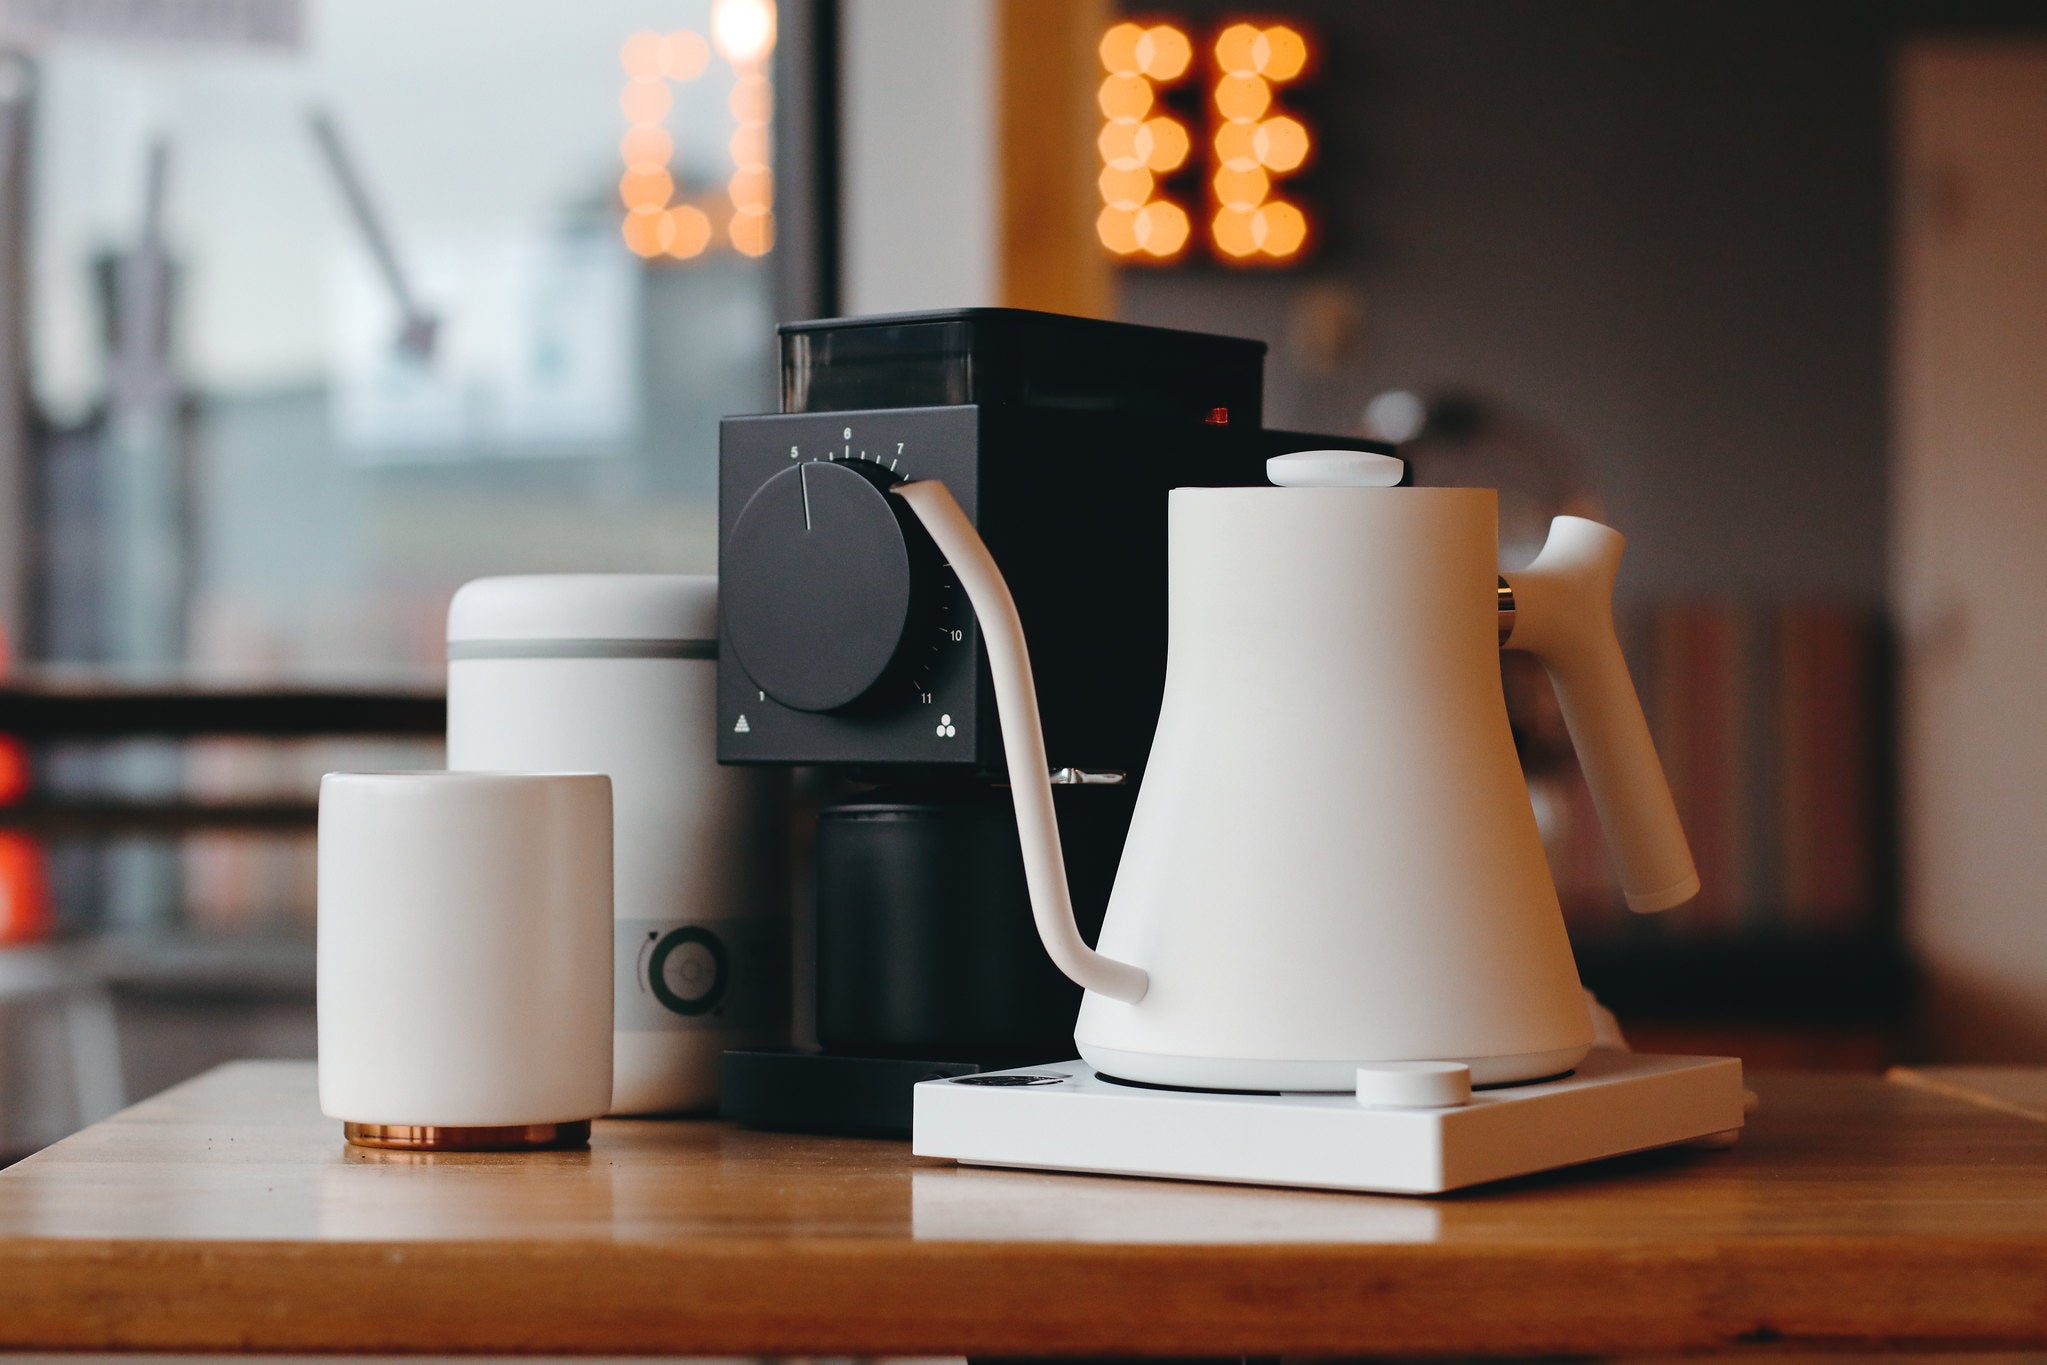 A line of Fellow products. A canister, Ode grinder and an electric kettle.